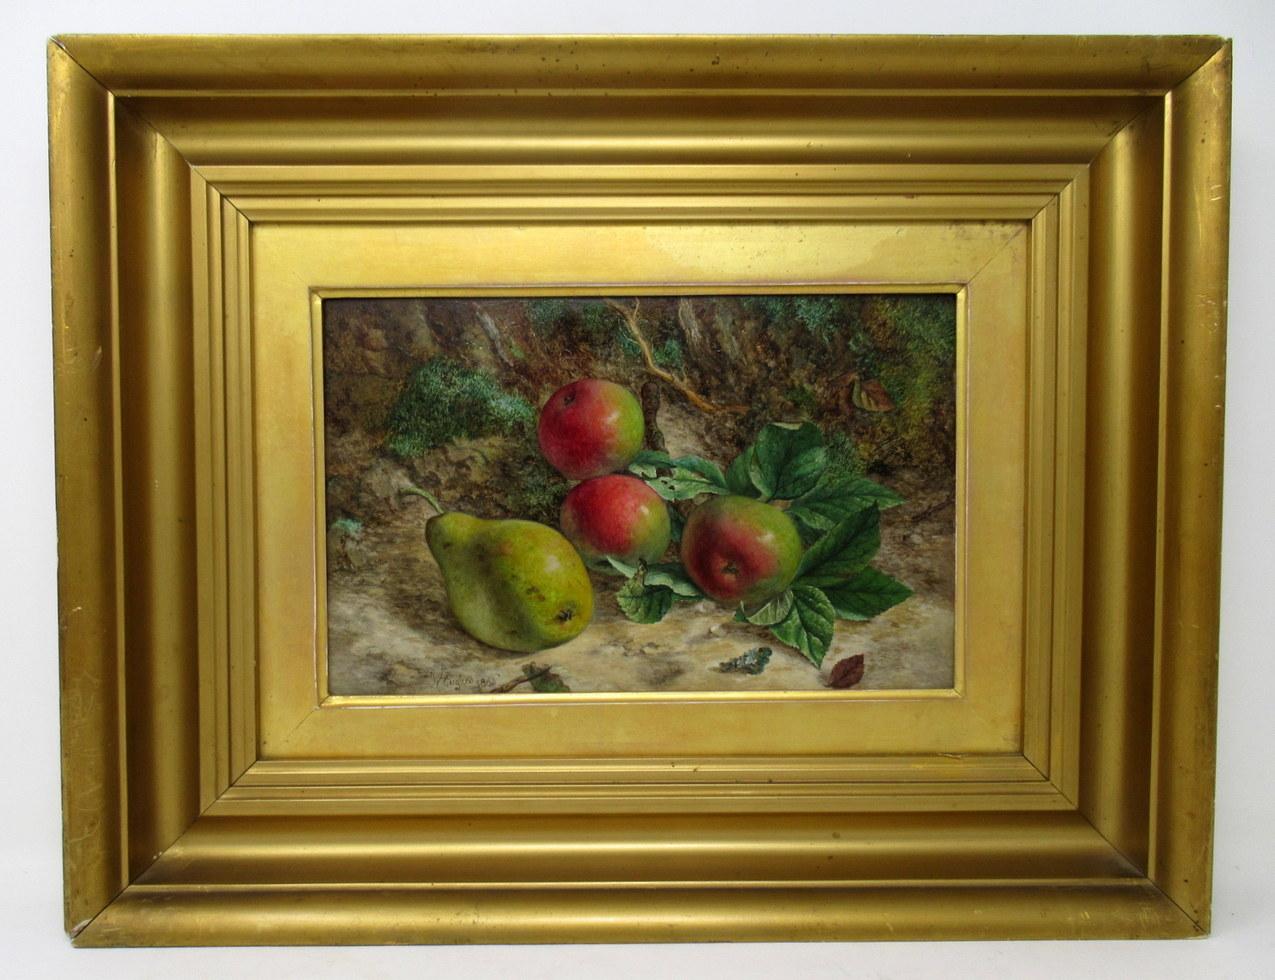 An exceptionally fine quality example of a pair of framed Still Life of fruits Oil Paintings on Artists board by well documented English Artist William Hughes, third quarter of the Nineteenth Century. Complete with good giltwood frames, one is